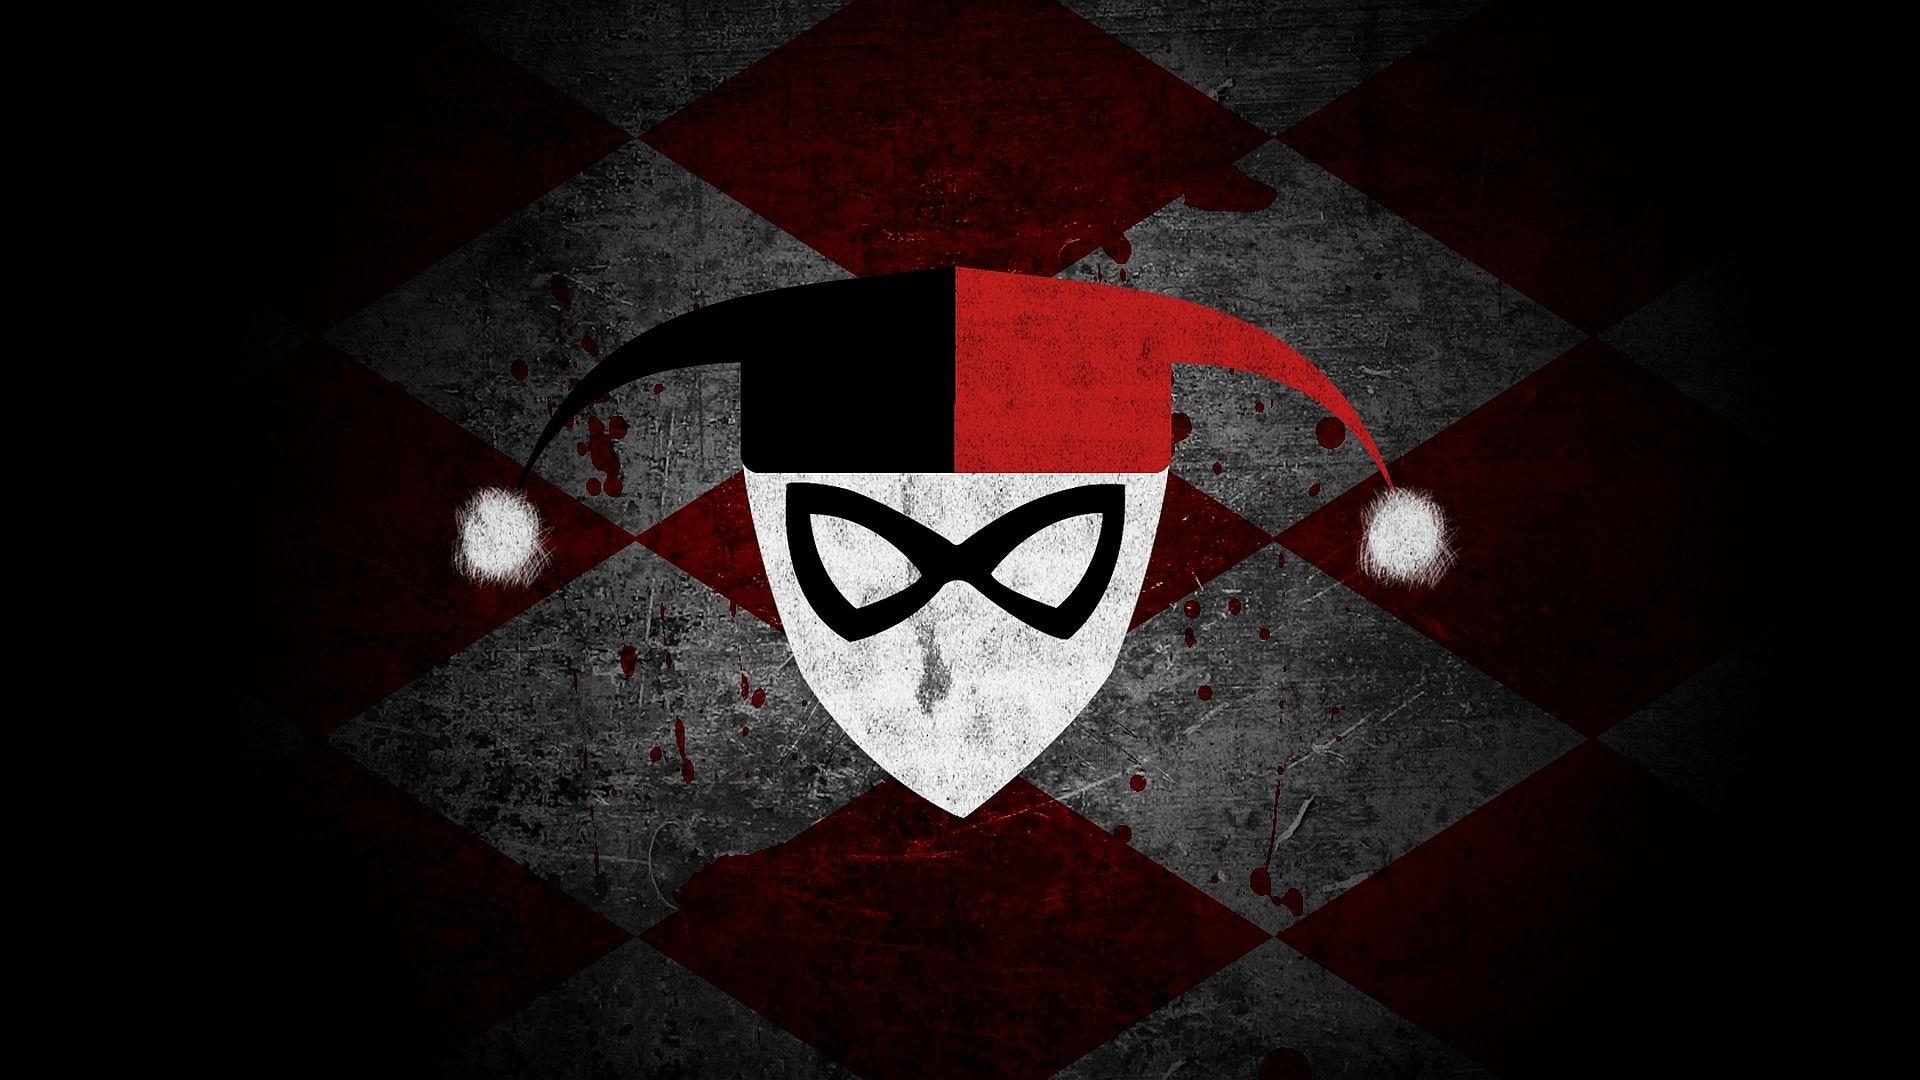 Cool HD Logo - harleyquinn logo hd wallpapers hd wallpapers cool images amazing ...